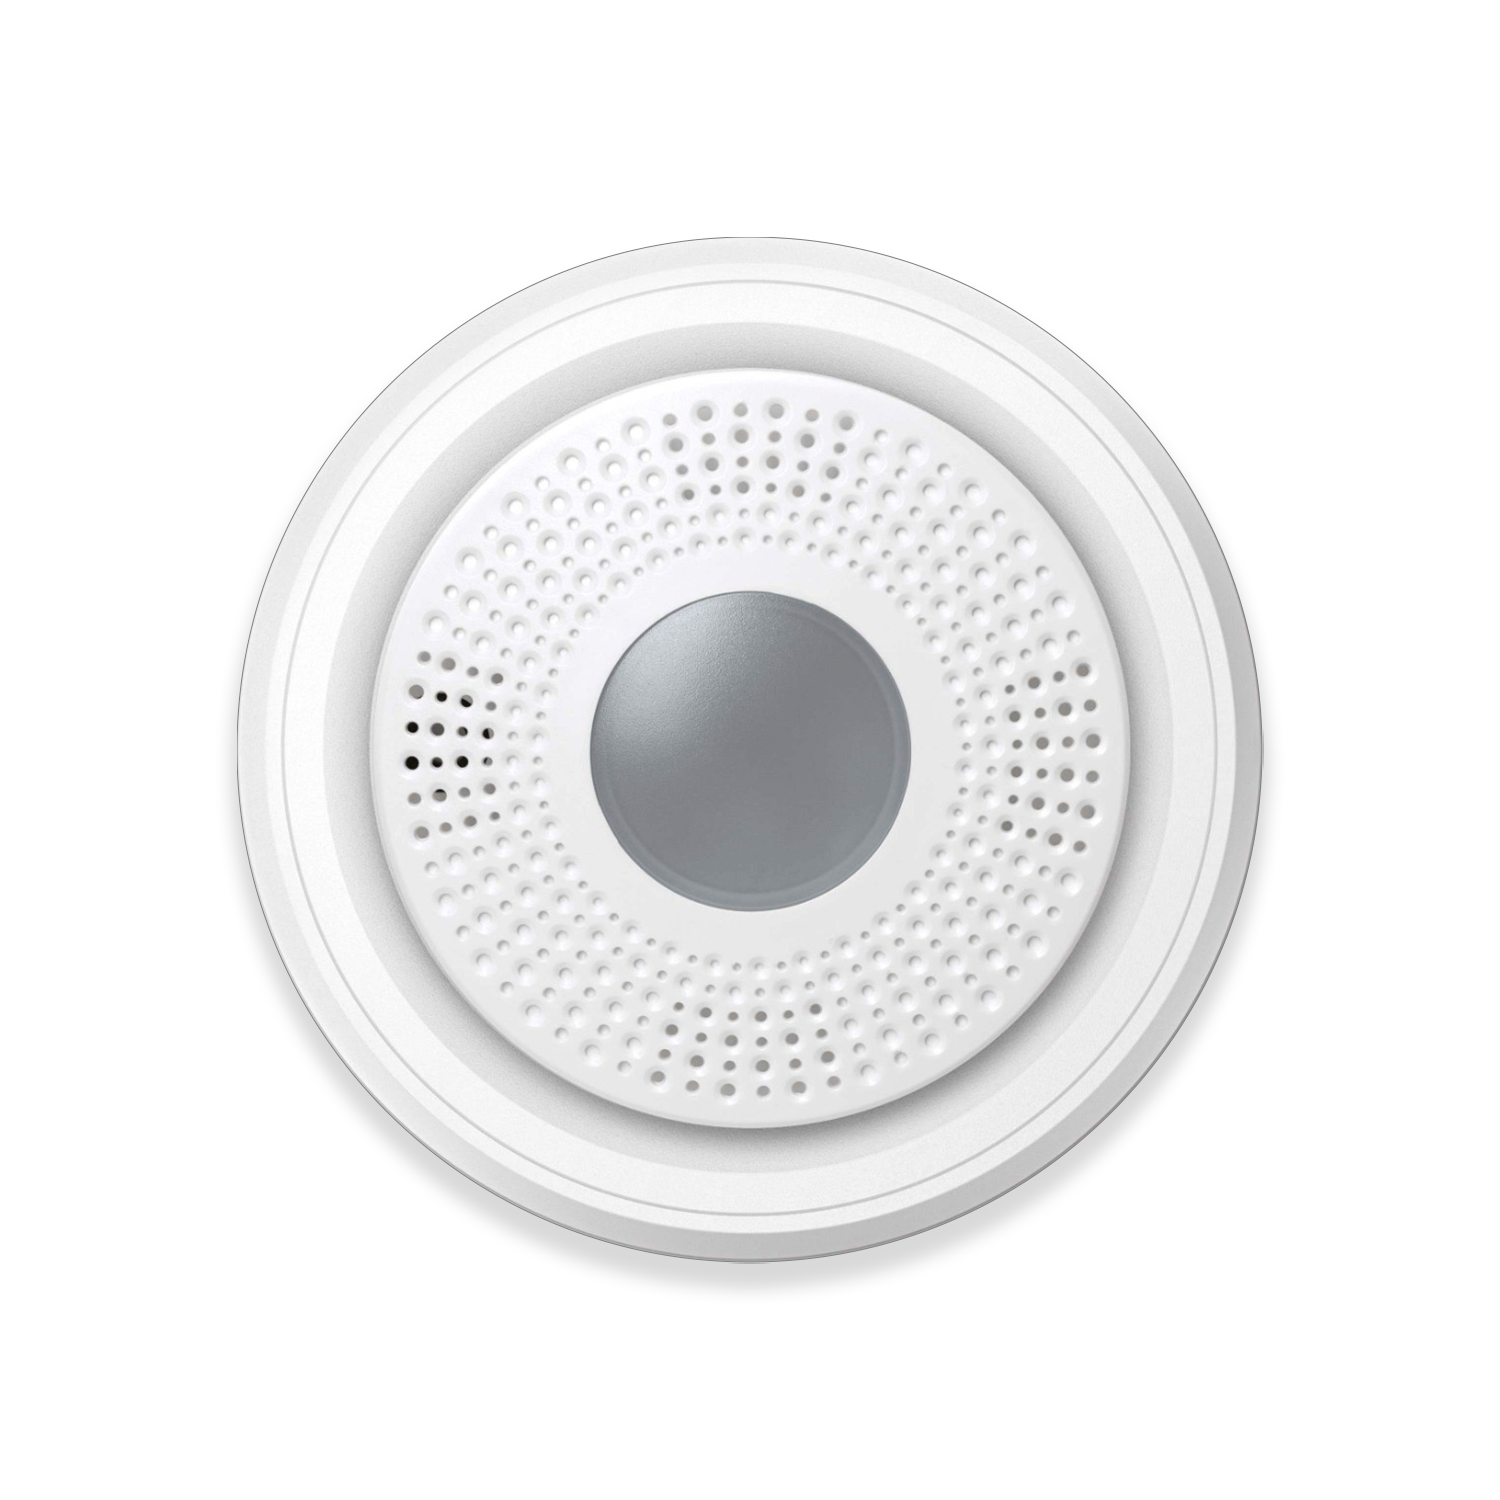 Designed for home security systems that support Two-Way Wireless Technology, this siren delivers big benefits to you and your customers: easy professional installation, remote monitoring/diagnostics, 128-bit AES encryption and tamper protection.